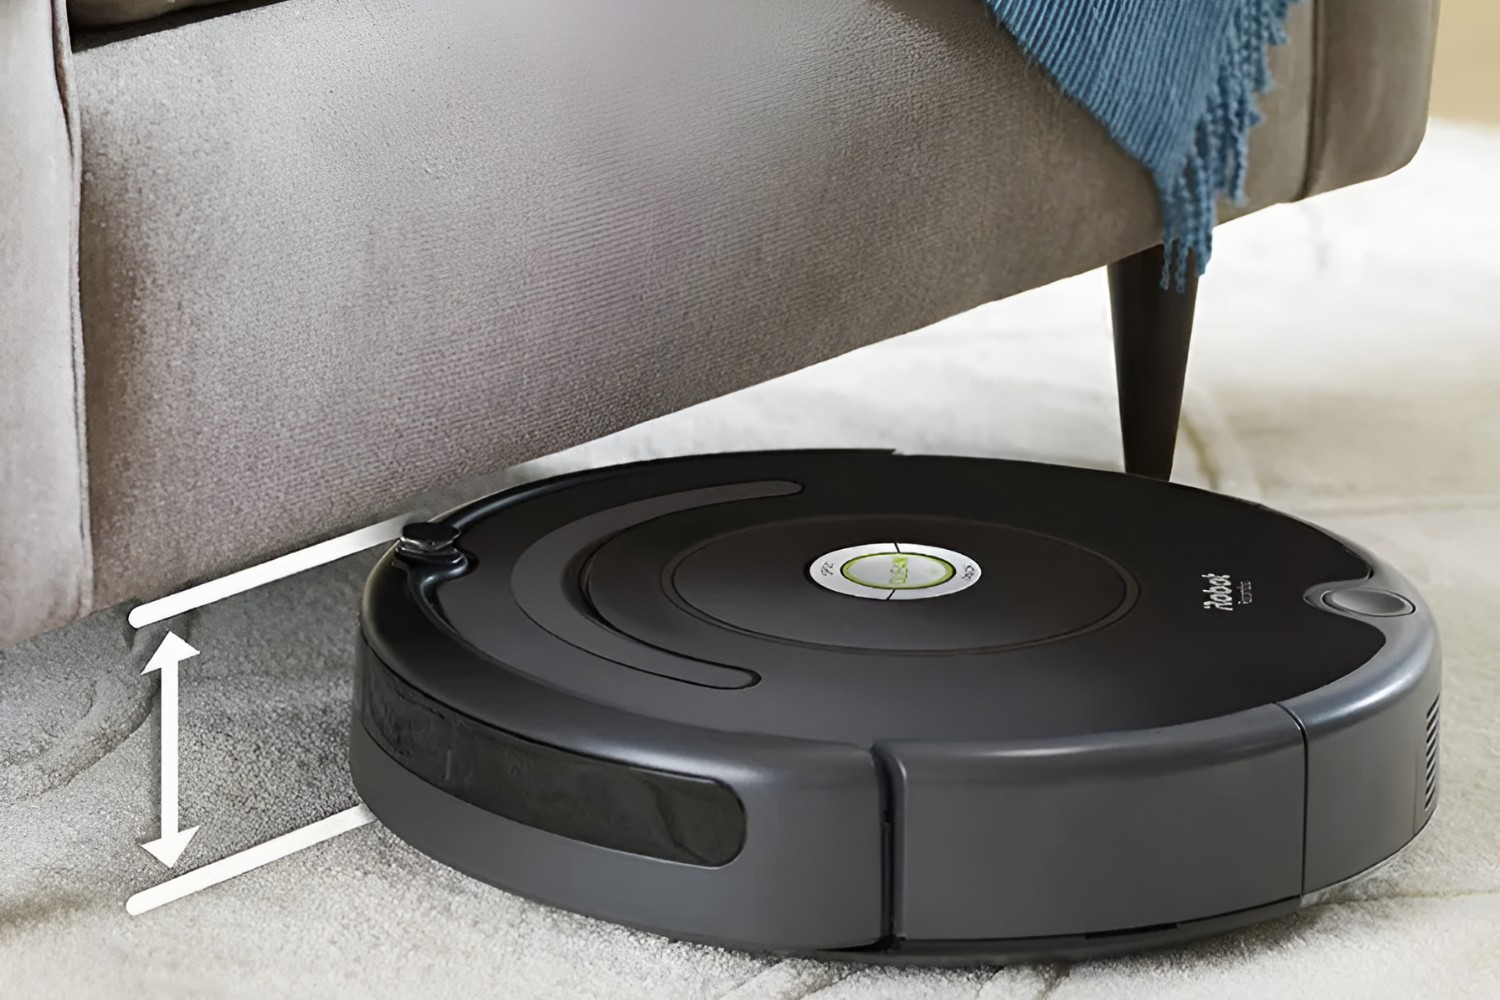 How To Keep A Robot Vacuum From Getting Stuck Under Furniture